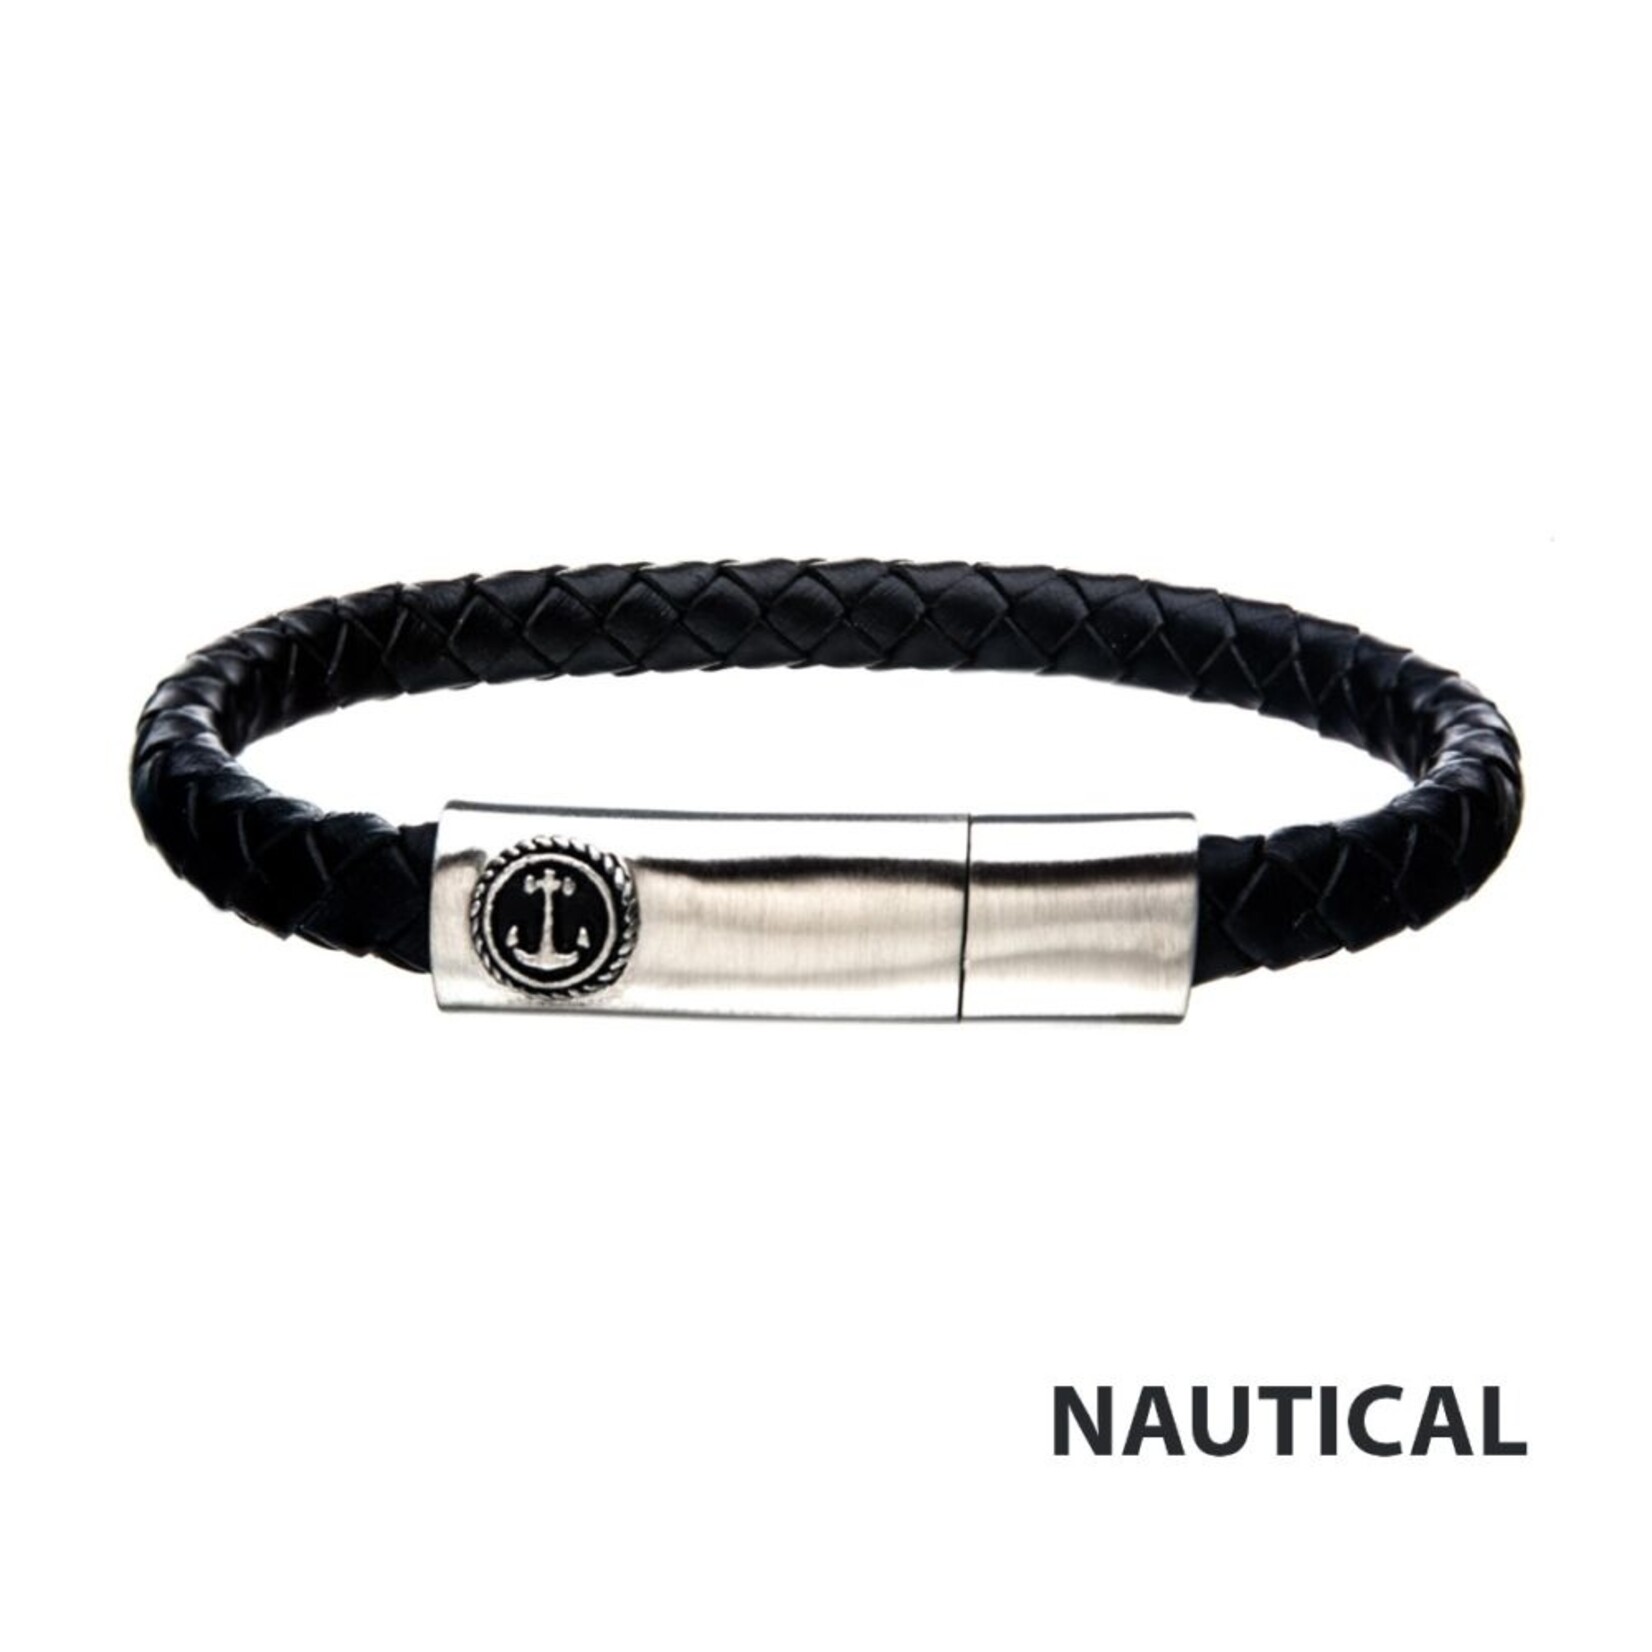 Inox Black Leather with Anchor in Brushed Steel Clasp Bar Bracelet